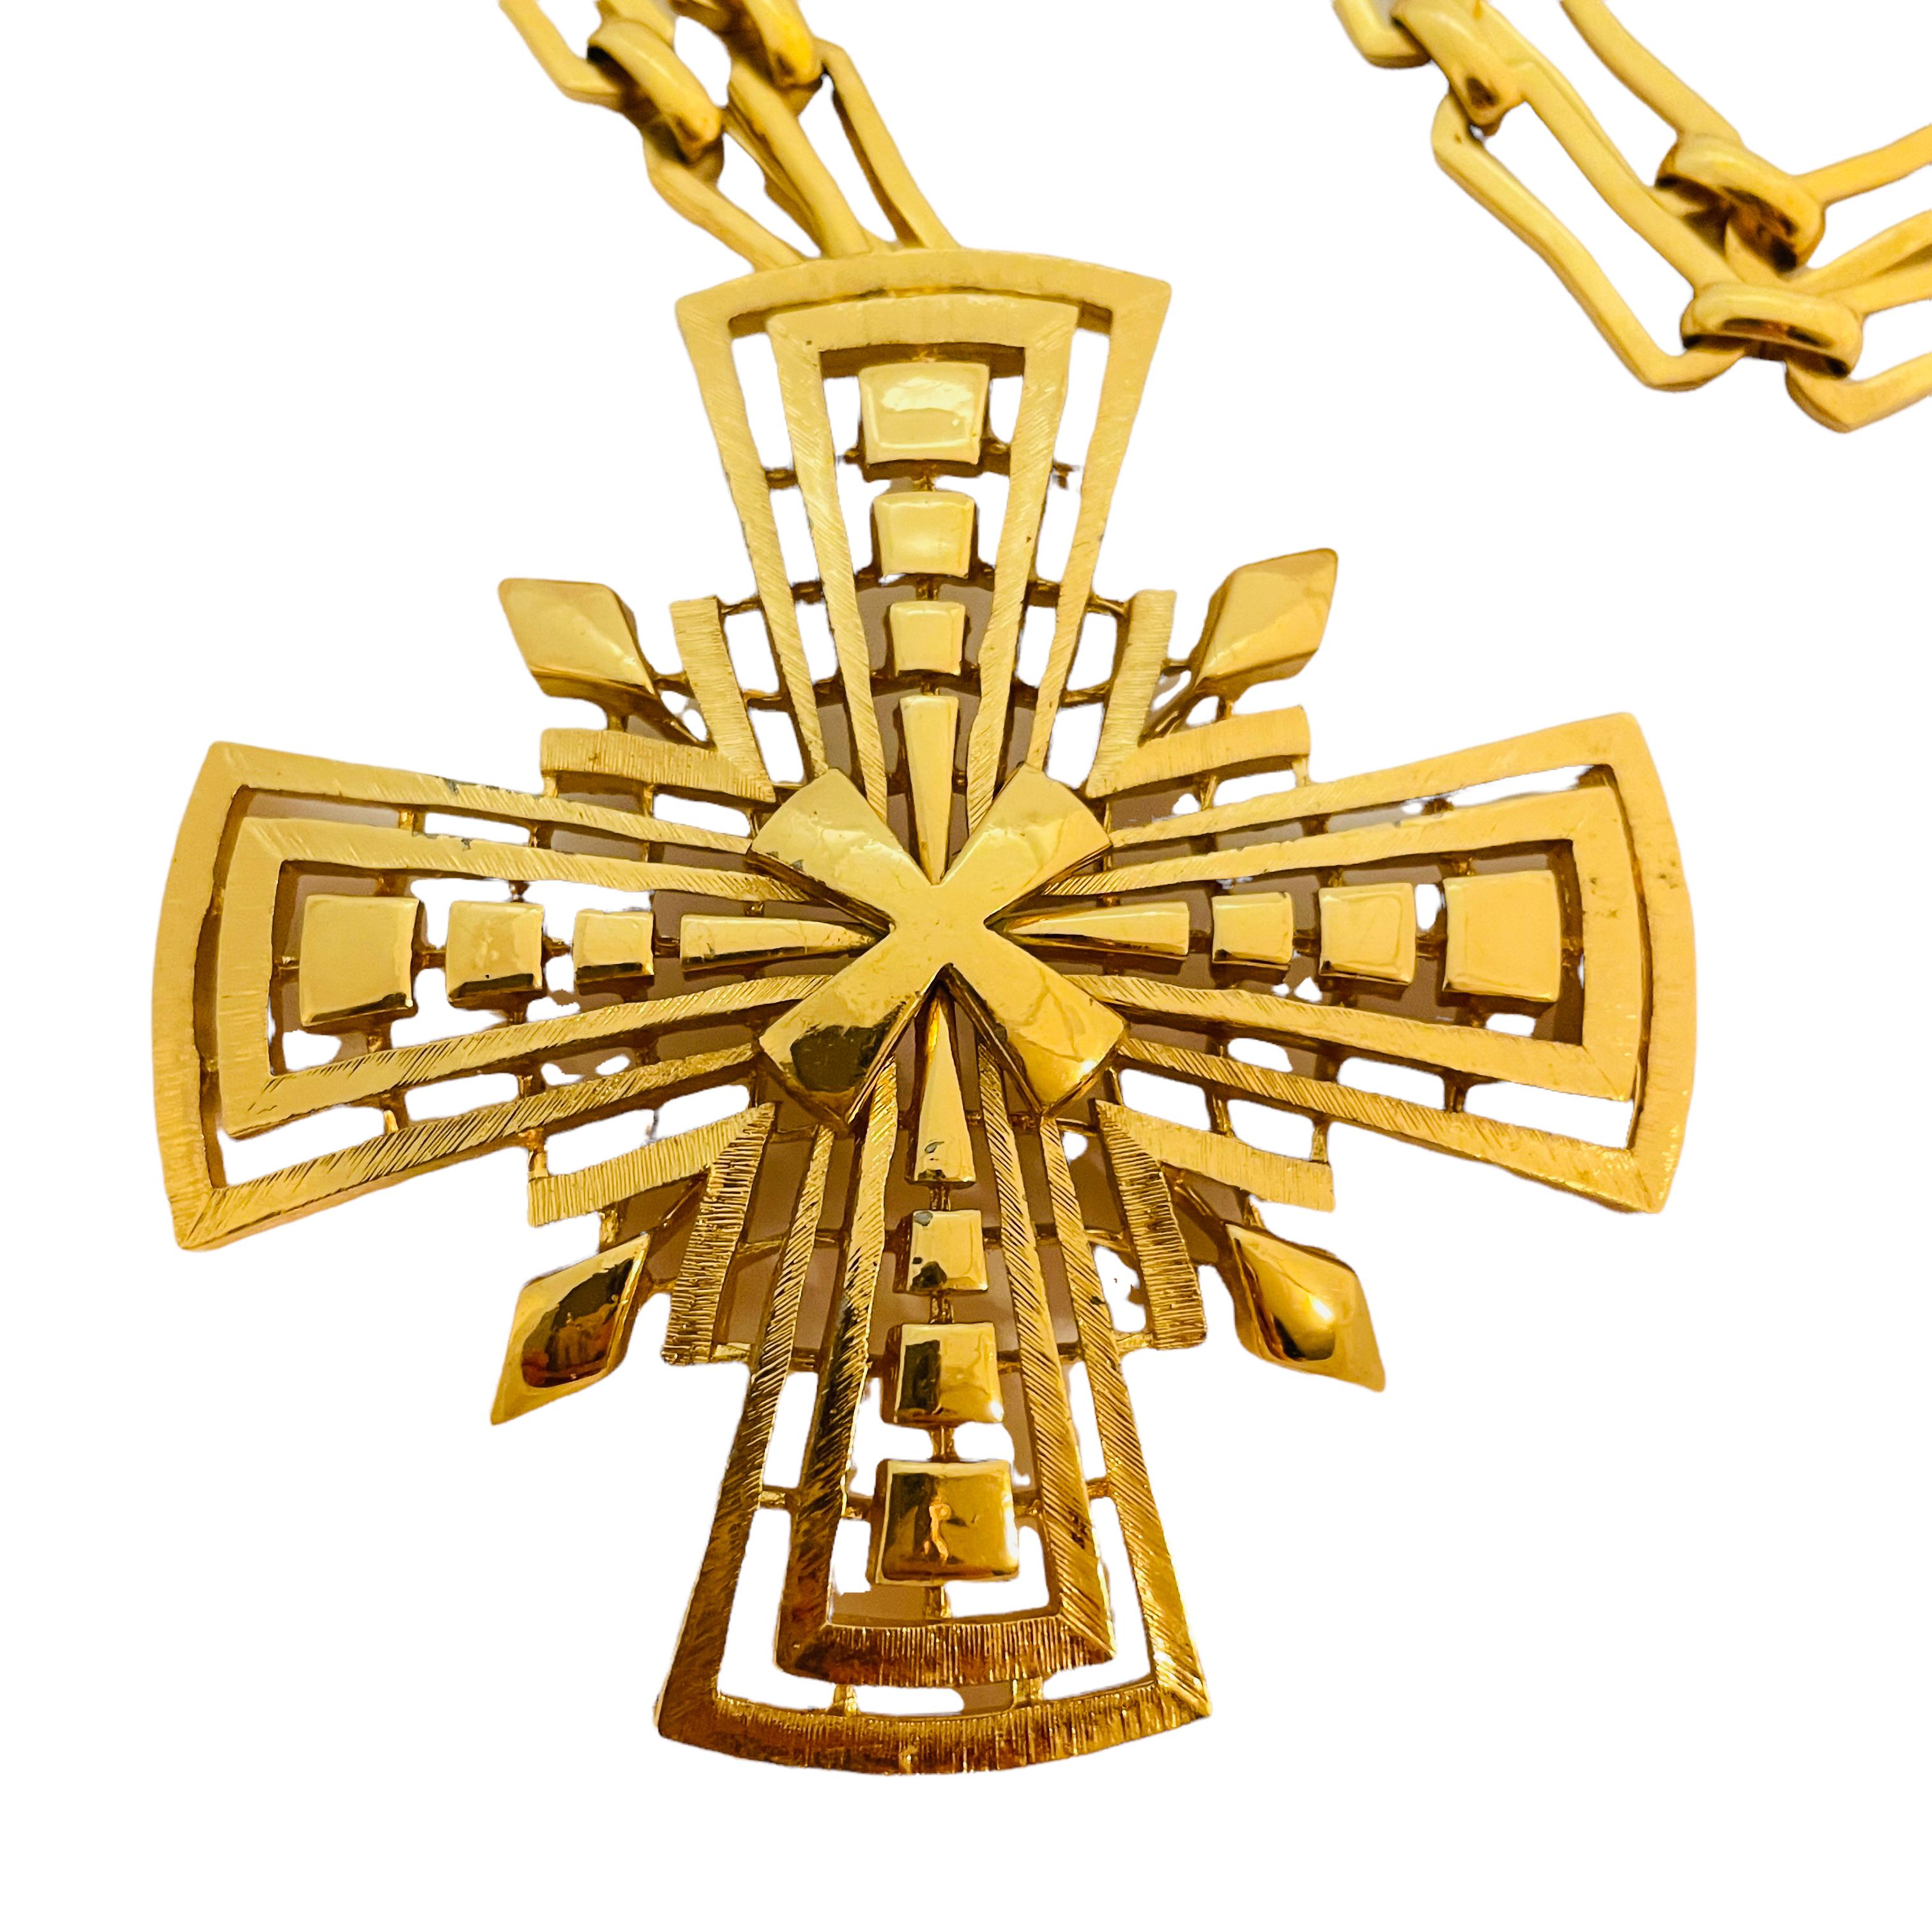 Vtg MONET gold cross pendant chain necklace designer runway In Excellent Condition For Sale In Palos Hills, IL